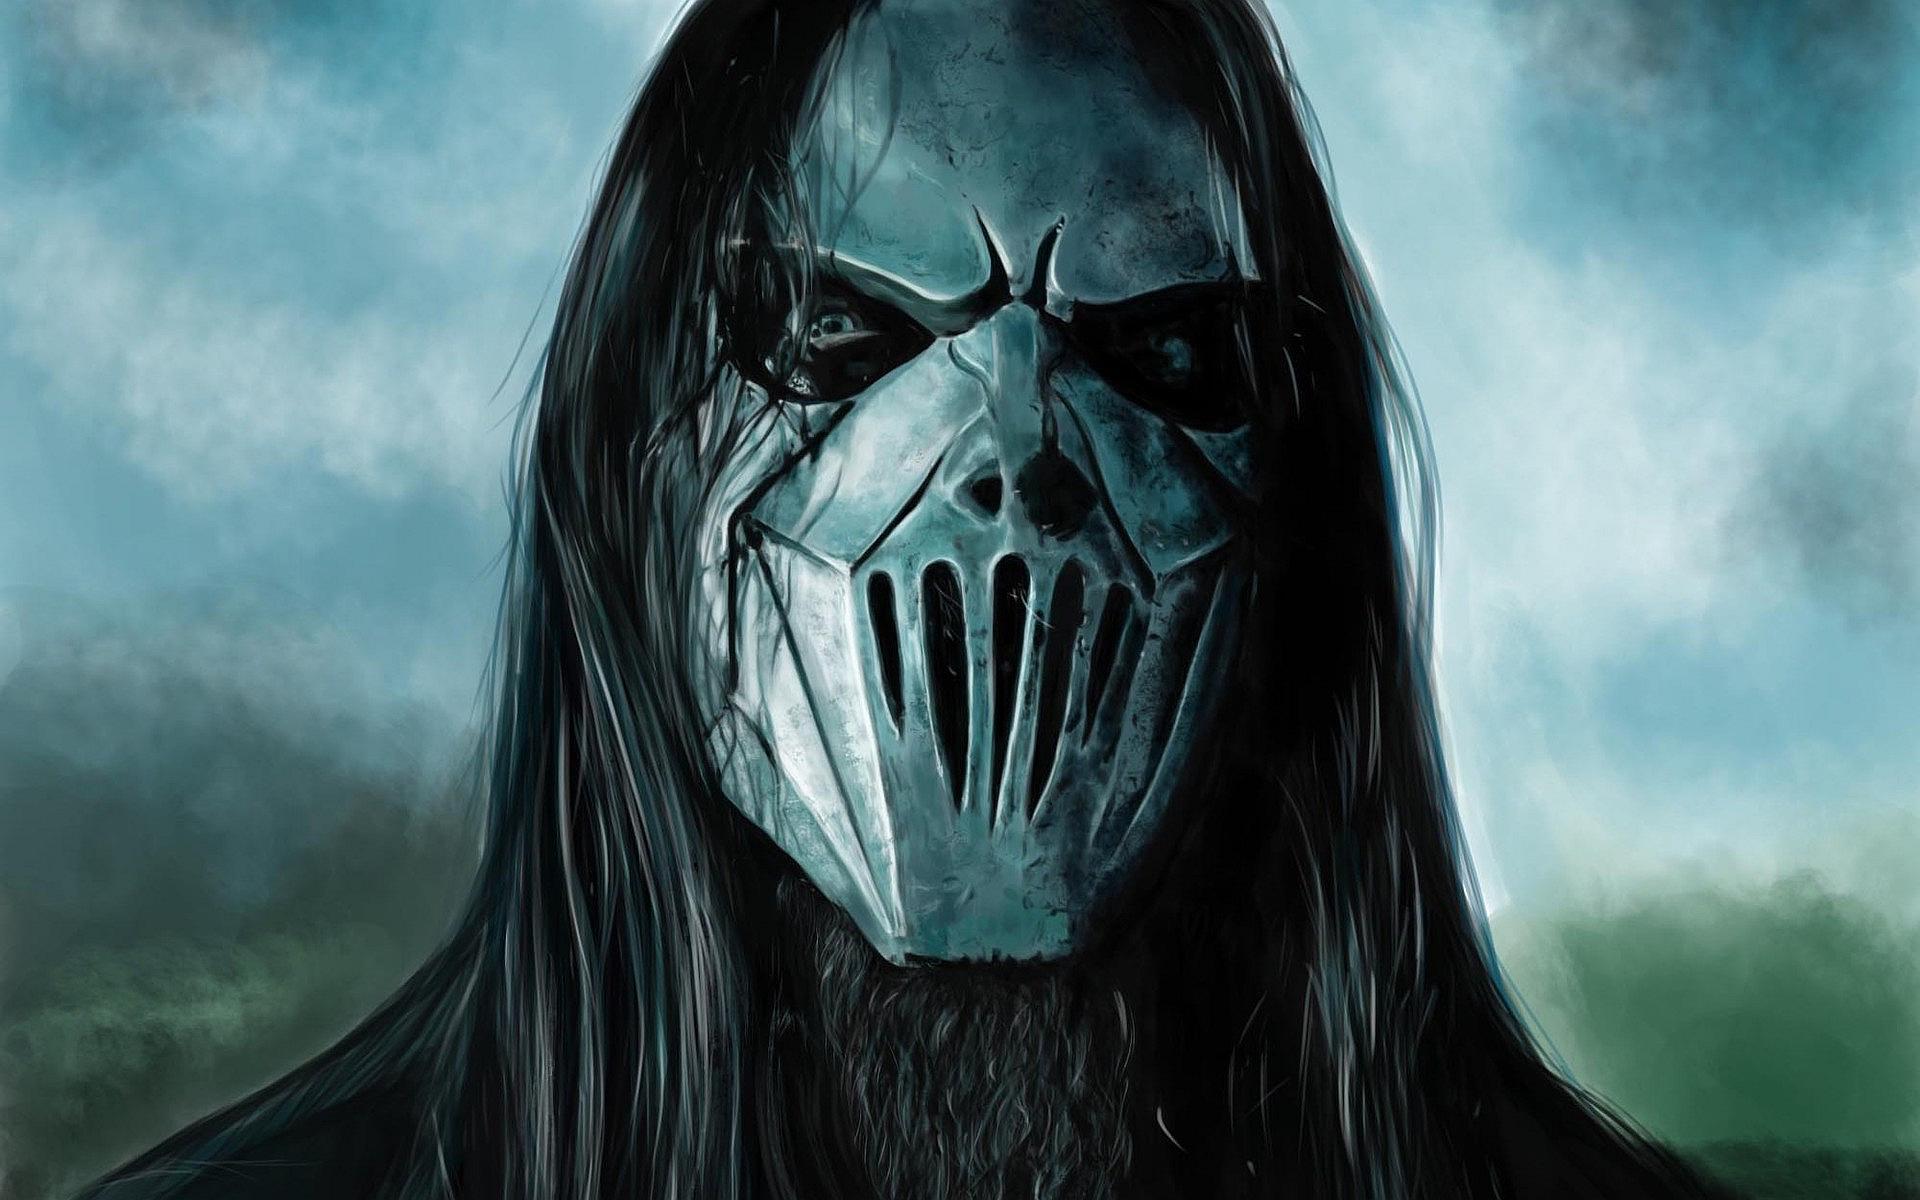 SLIPKNOT's Mick Thomson Suffers Stab Wound To Back of The Head After